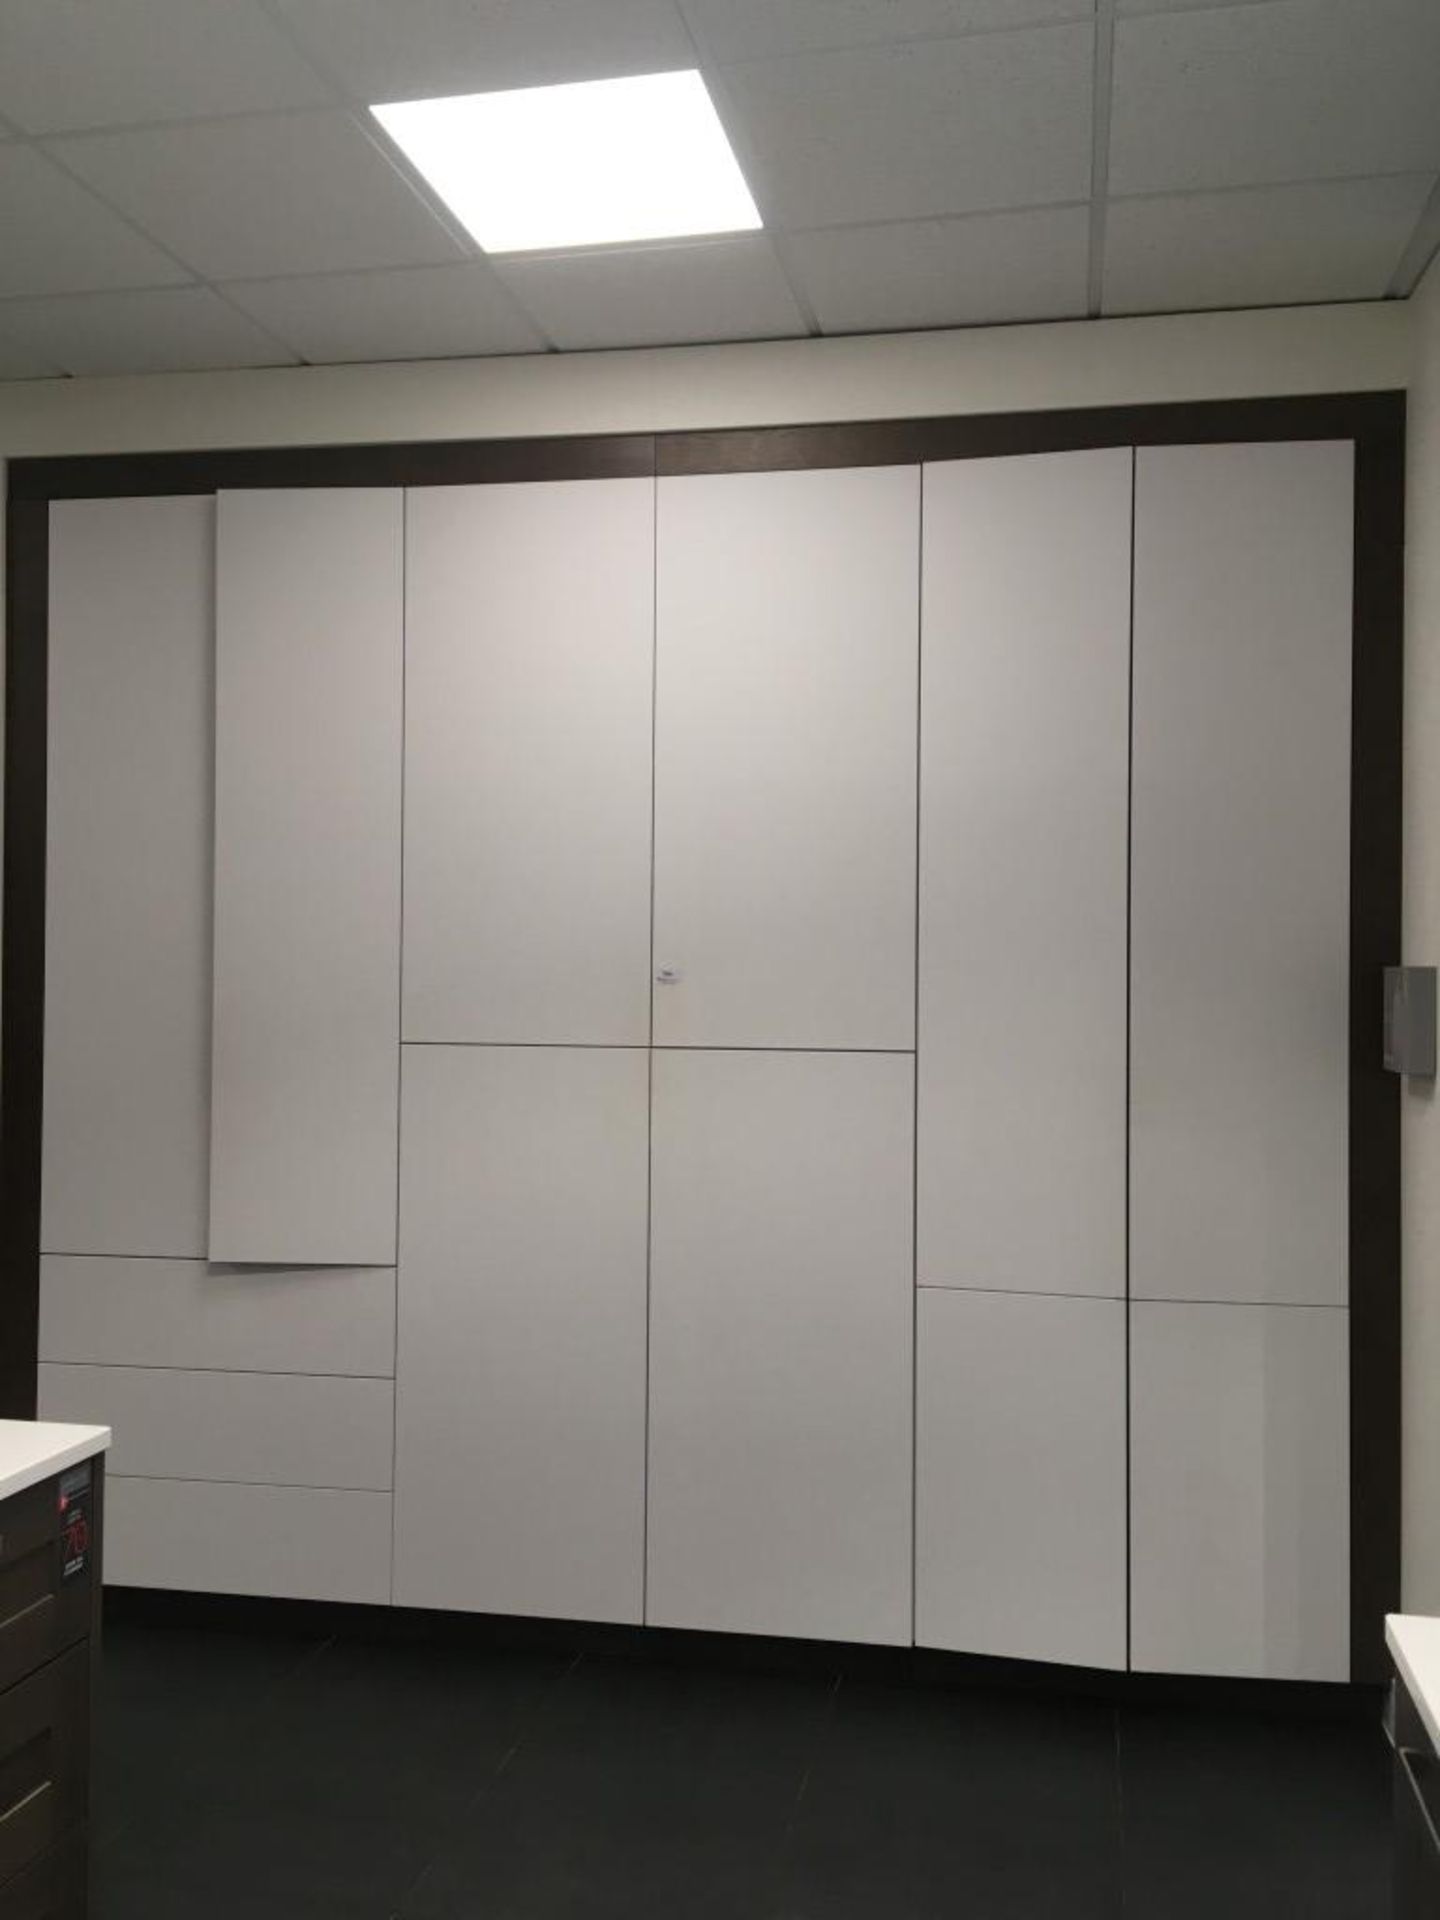 White laminate 8' wall mount storage unit including integrated soft close six drawer unit